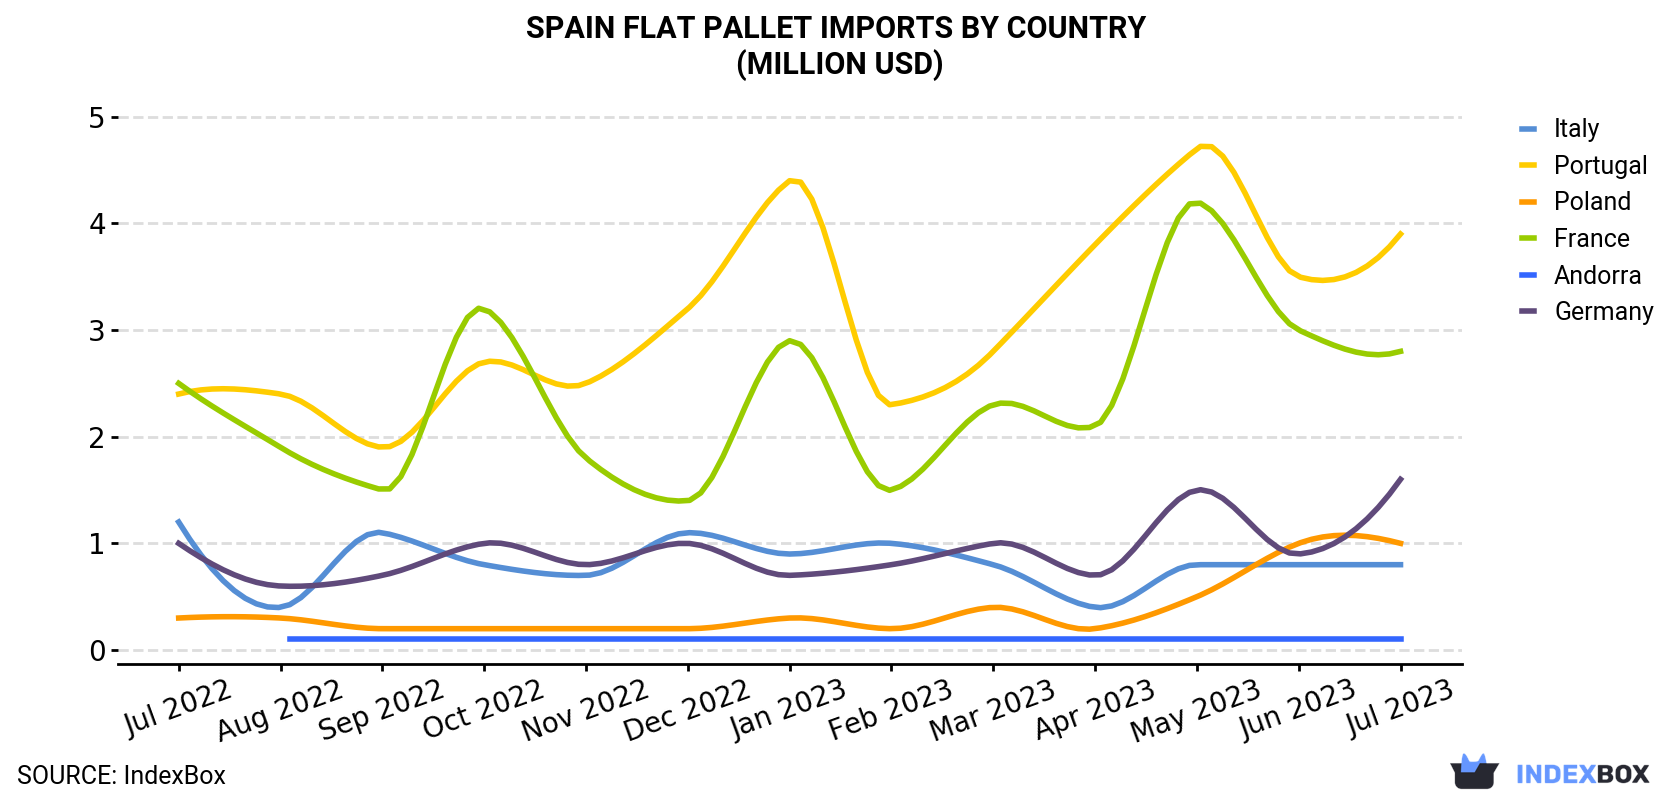 Spain Flat Pallet Imports By Country (Million USD)